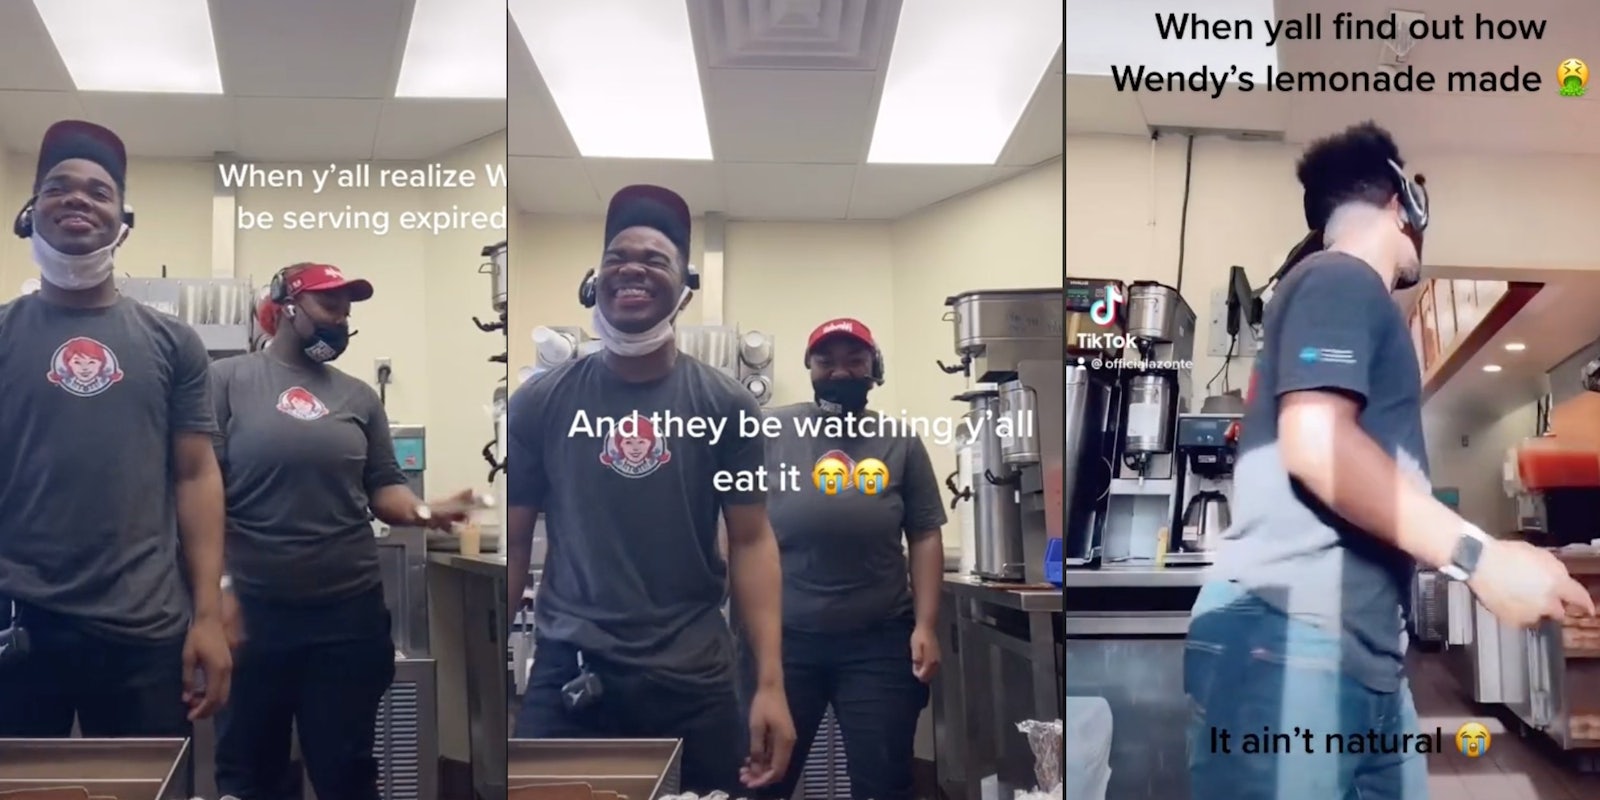 wendys employees claiming the meat is expired, azonte berry saying wendys lemonade is bad